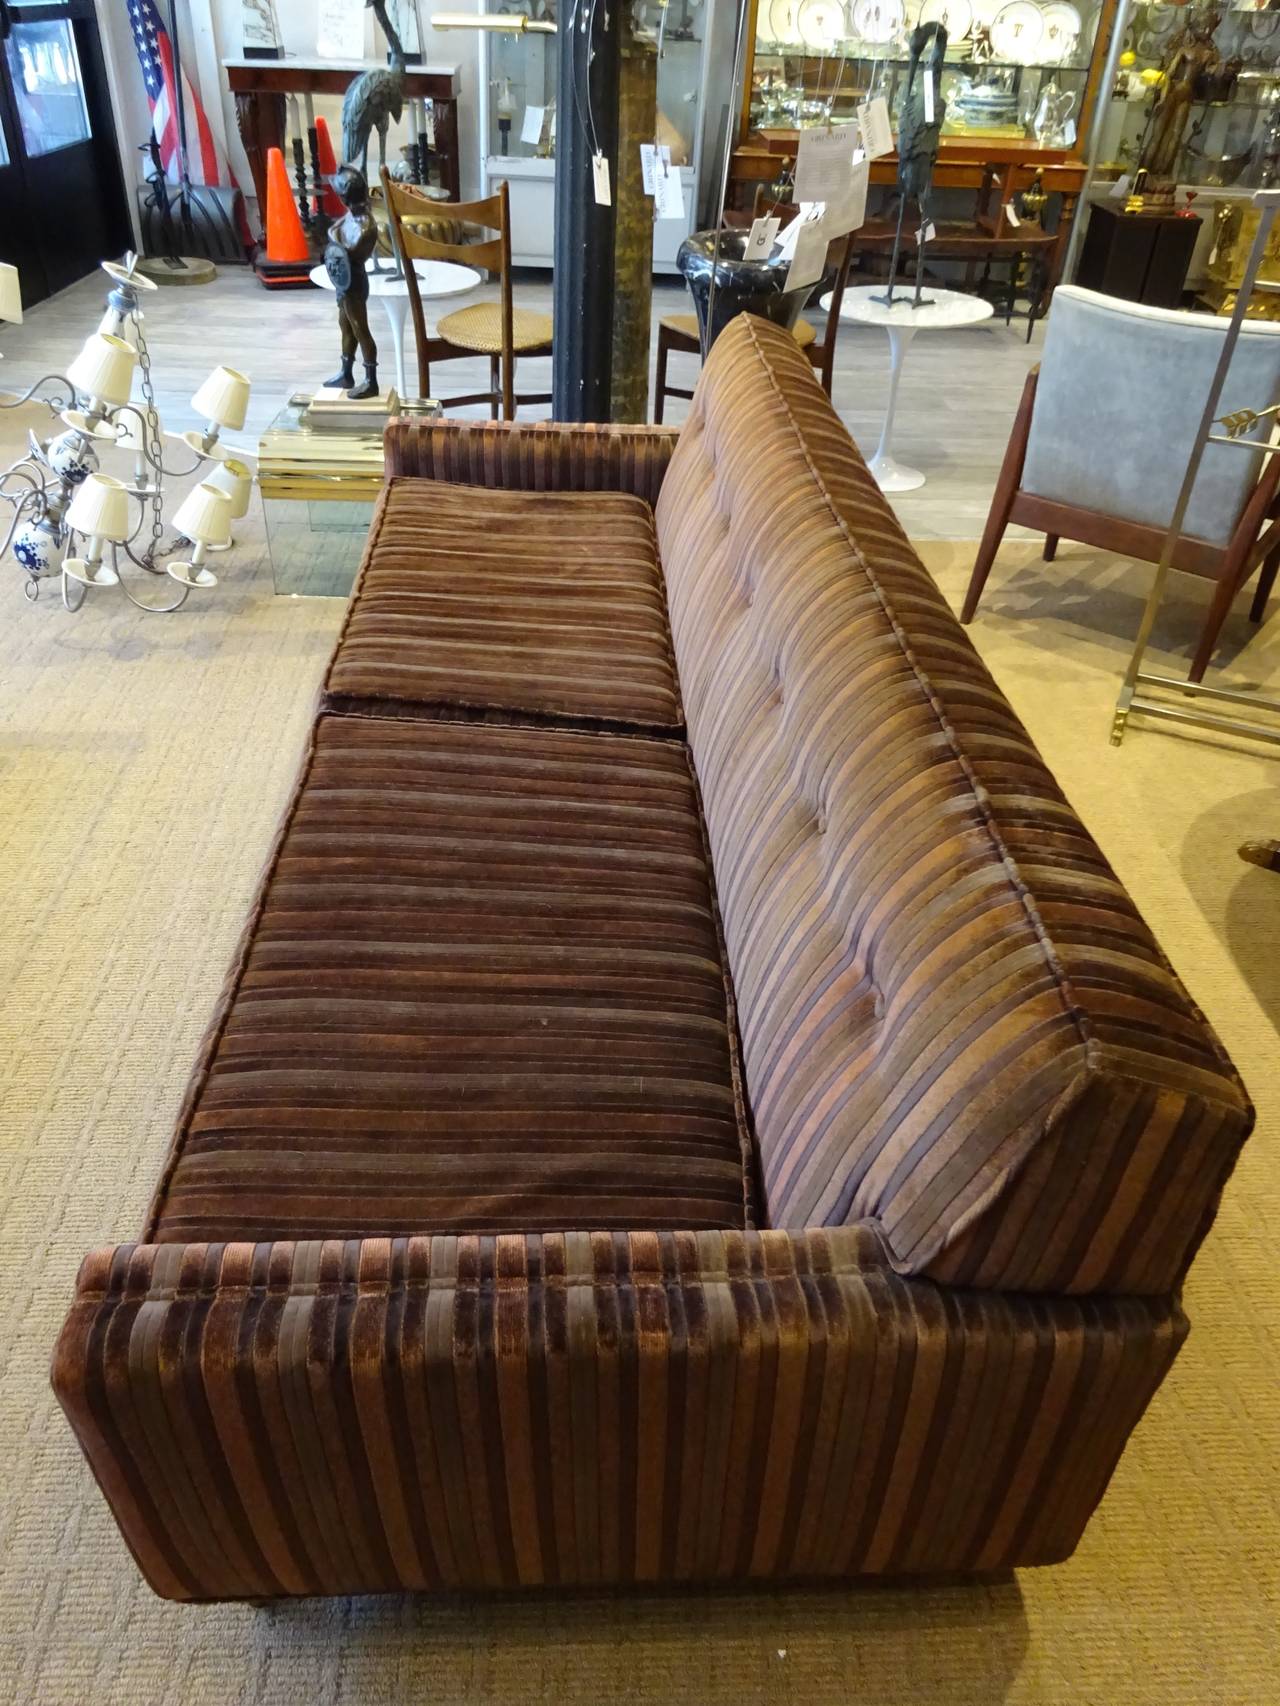 Sofa in the Style of Paul McCobb, of rectangular form raised on three front legs, supporting the rectangualr tuxedo style sofa with two cushions. Upholstery is vintage and in very good condition.